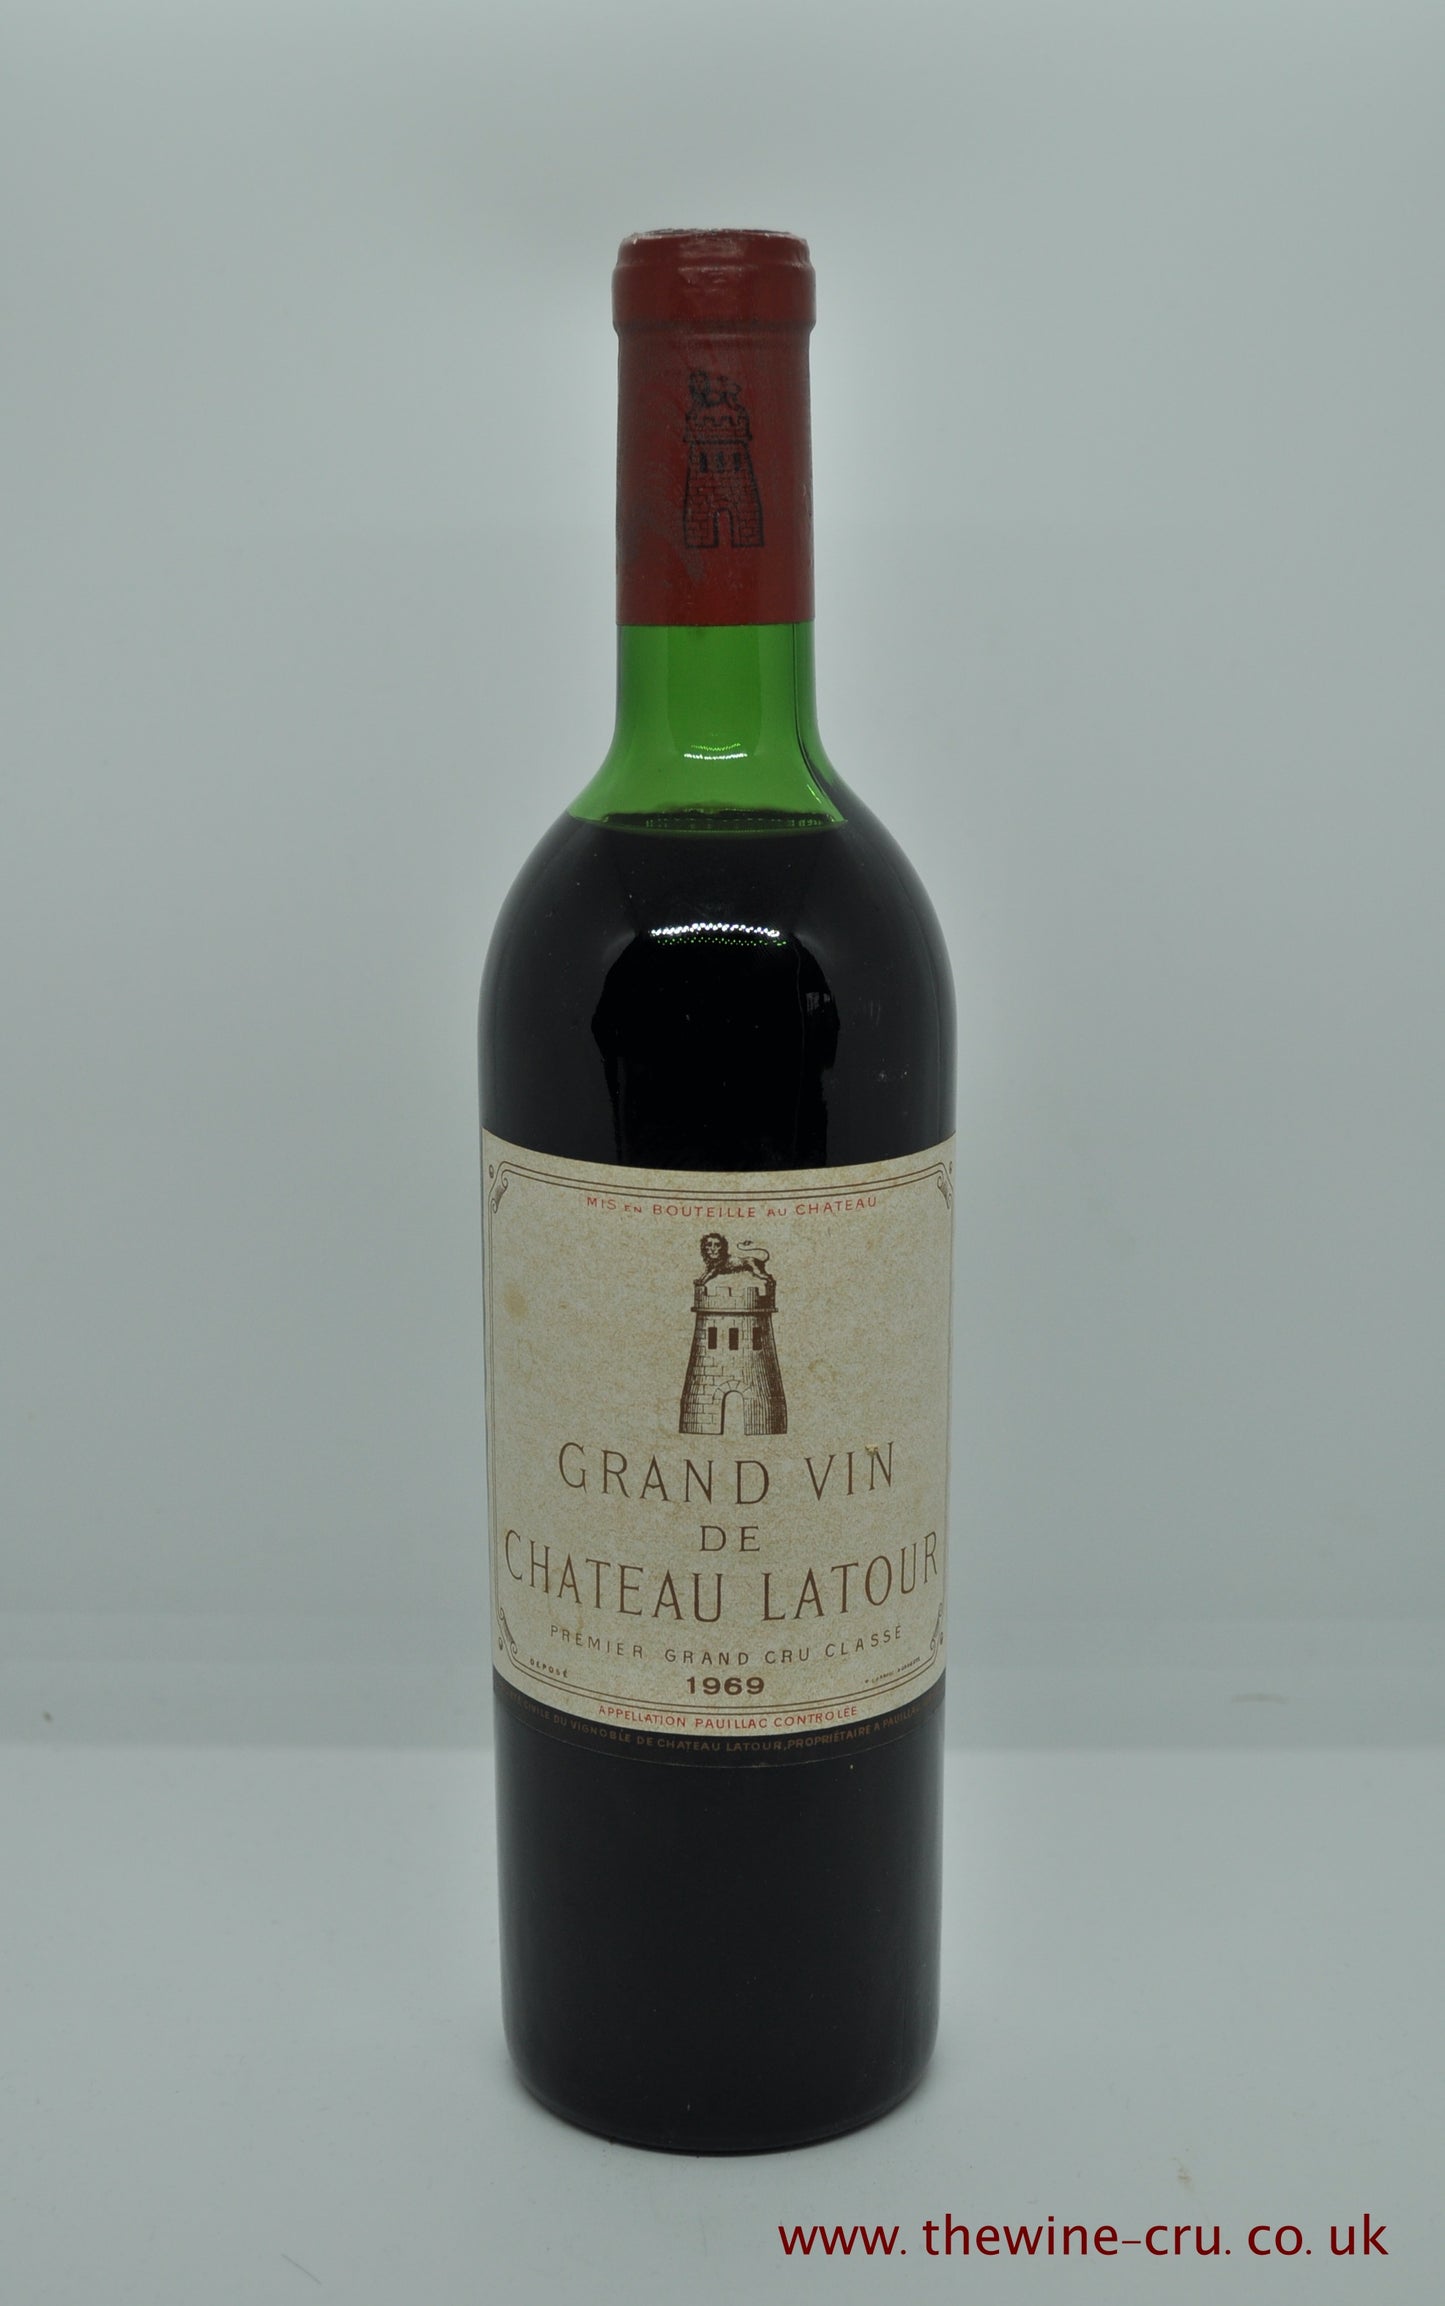 1969 vintage red wine. Chateau Latour 1969. France, Bordeaux. The bottle is in good condition with the level being top shoulder. Immediate delivery. Free local delivery. Gift wrapping available.